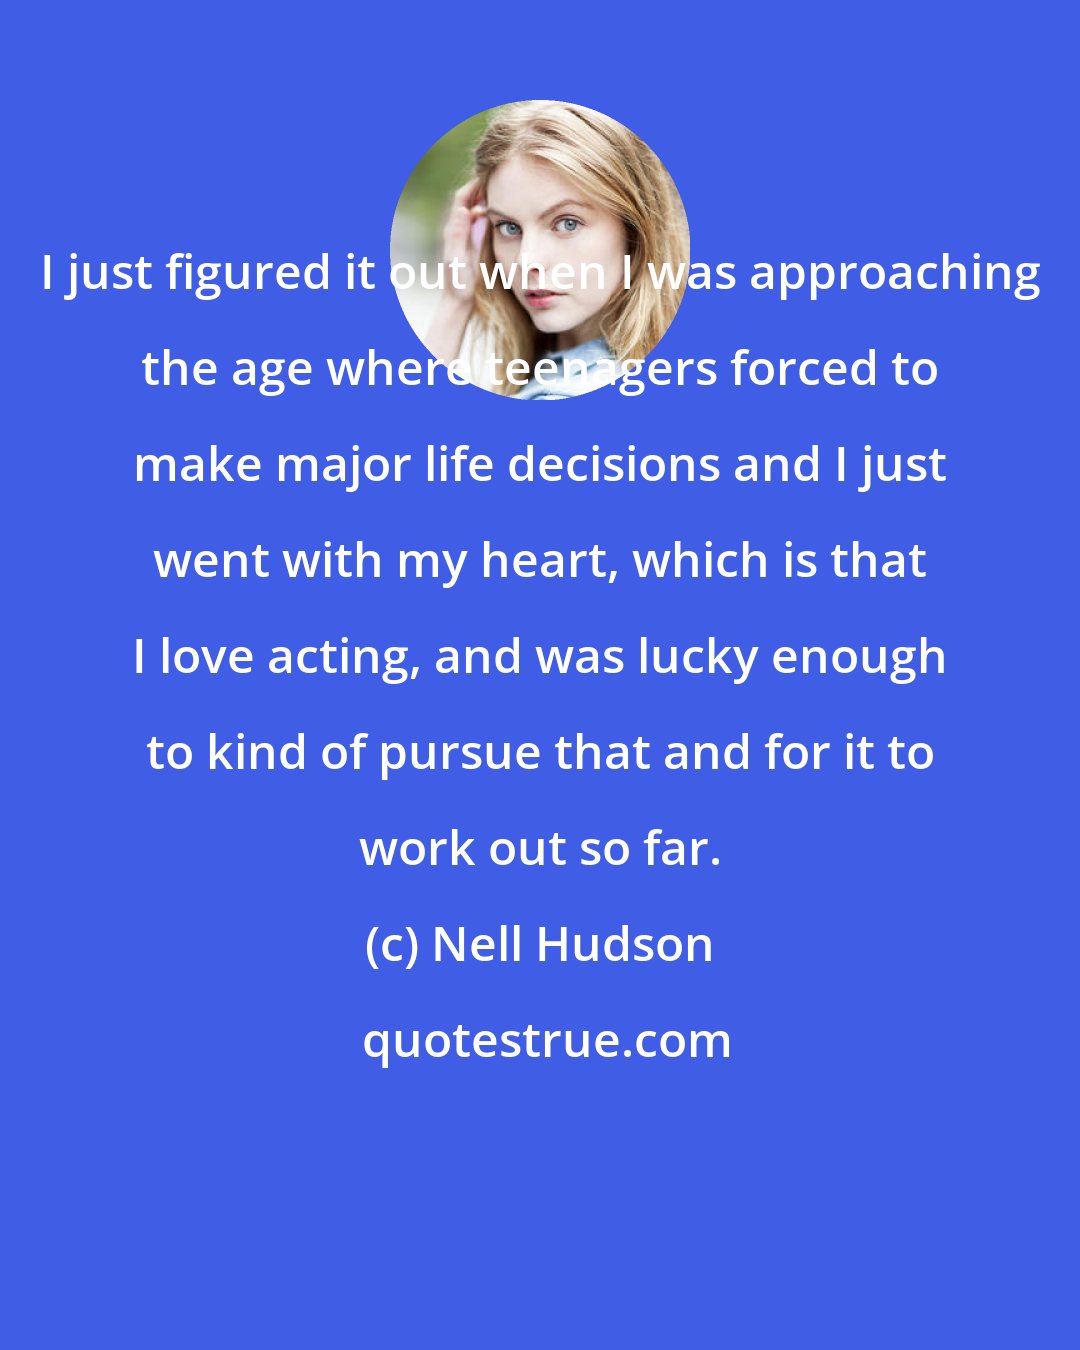 Nell Hudson: I just figured it out when I was approaching the age where teenagers forced to make major life decisions and I just went with my heart, which is that I love acting, and was lucky enough to kind of pursue that and for it to work out so far.